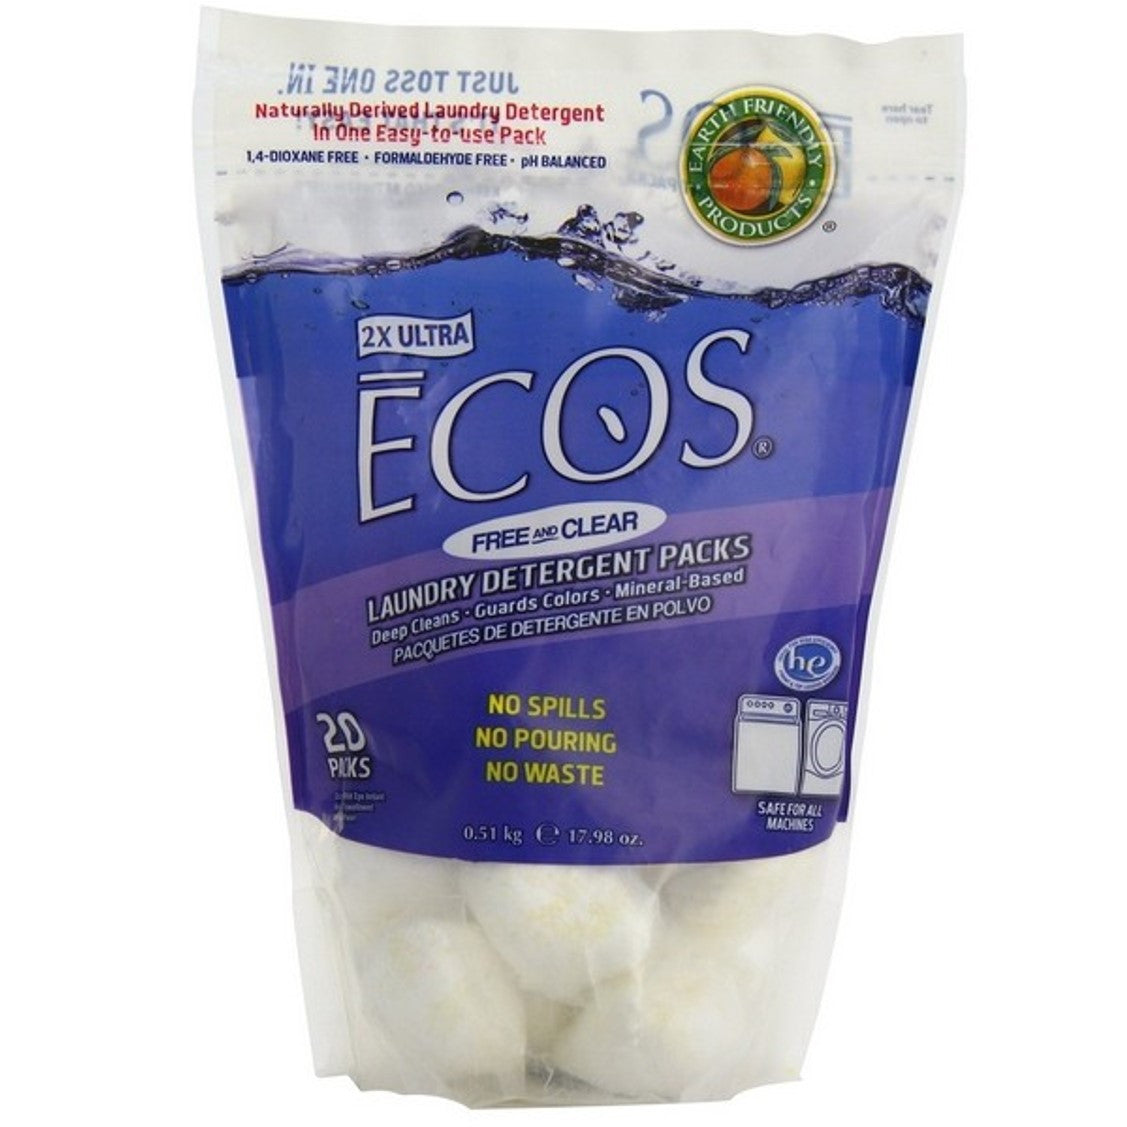 Earth Friendly ECOS Laundry Detergent Packs - Free & Clear, 510 g.-NaturesWisdom